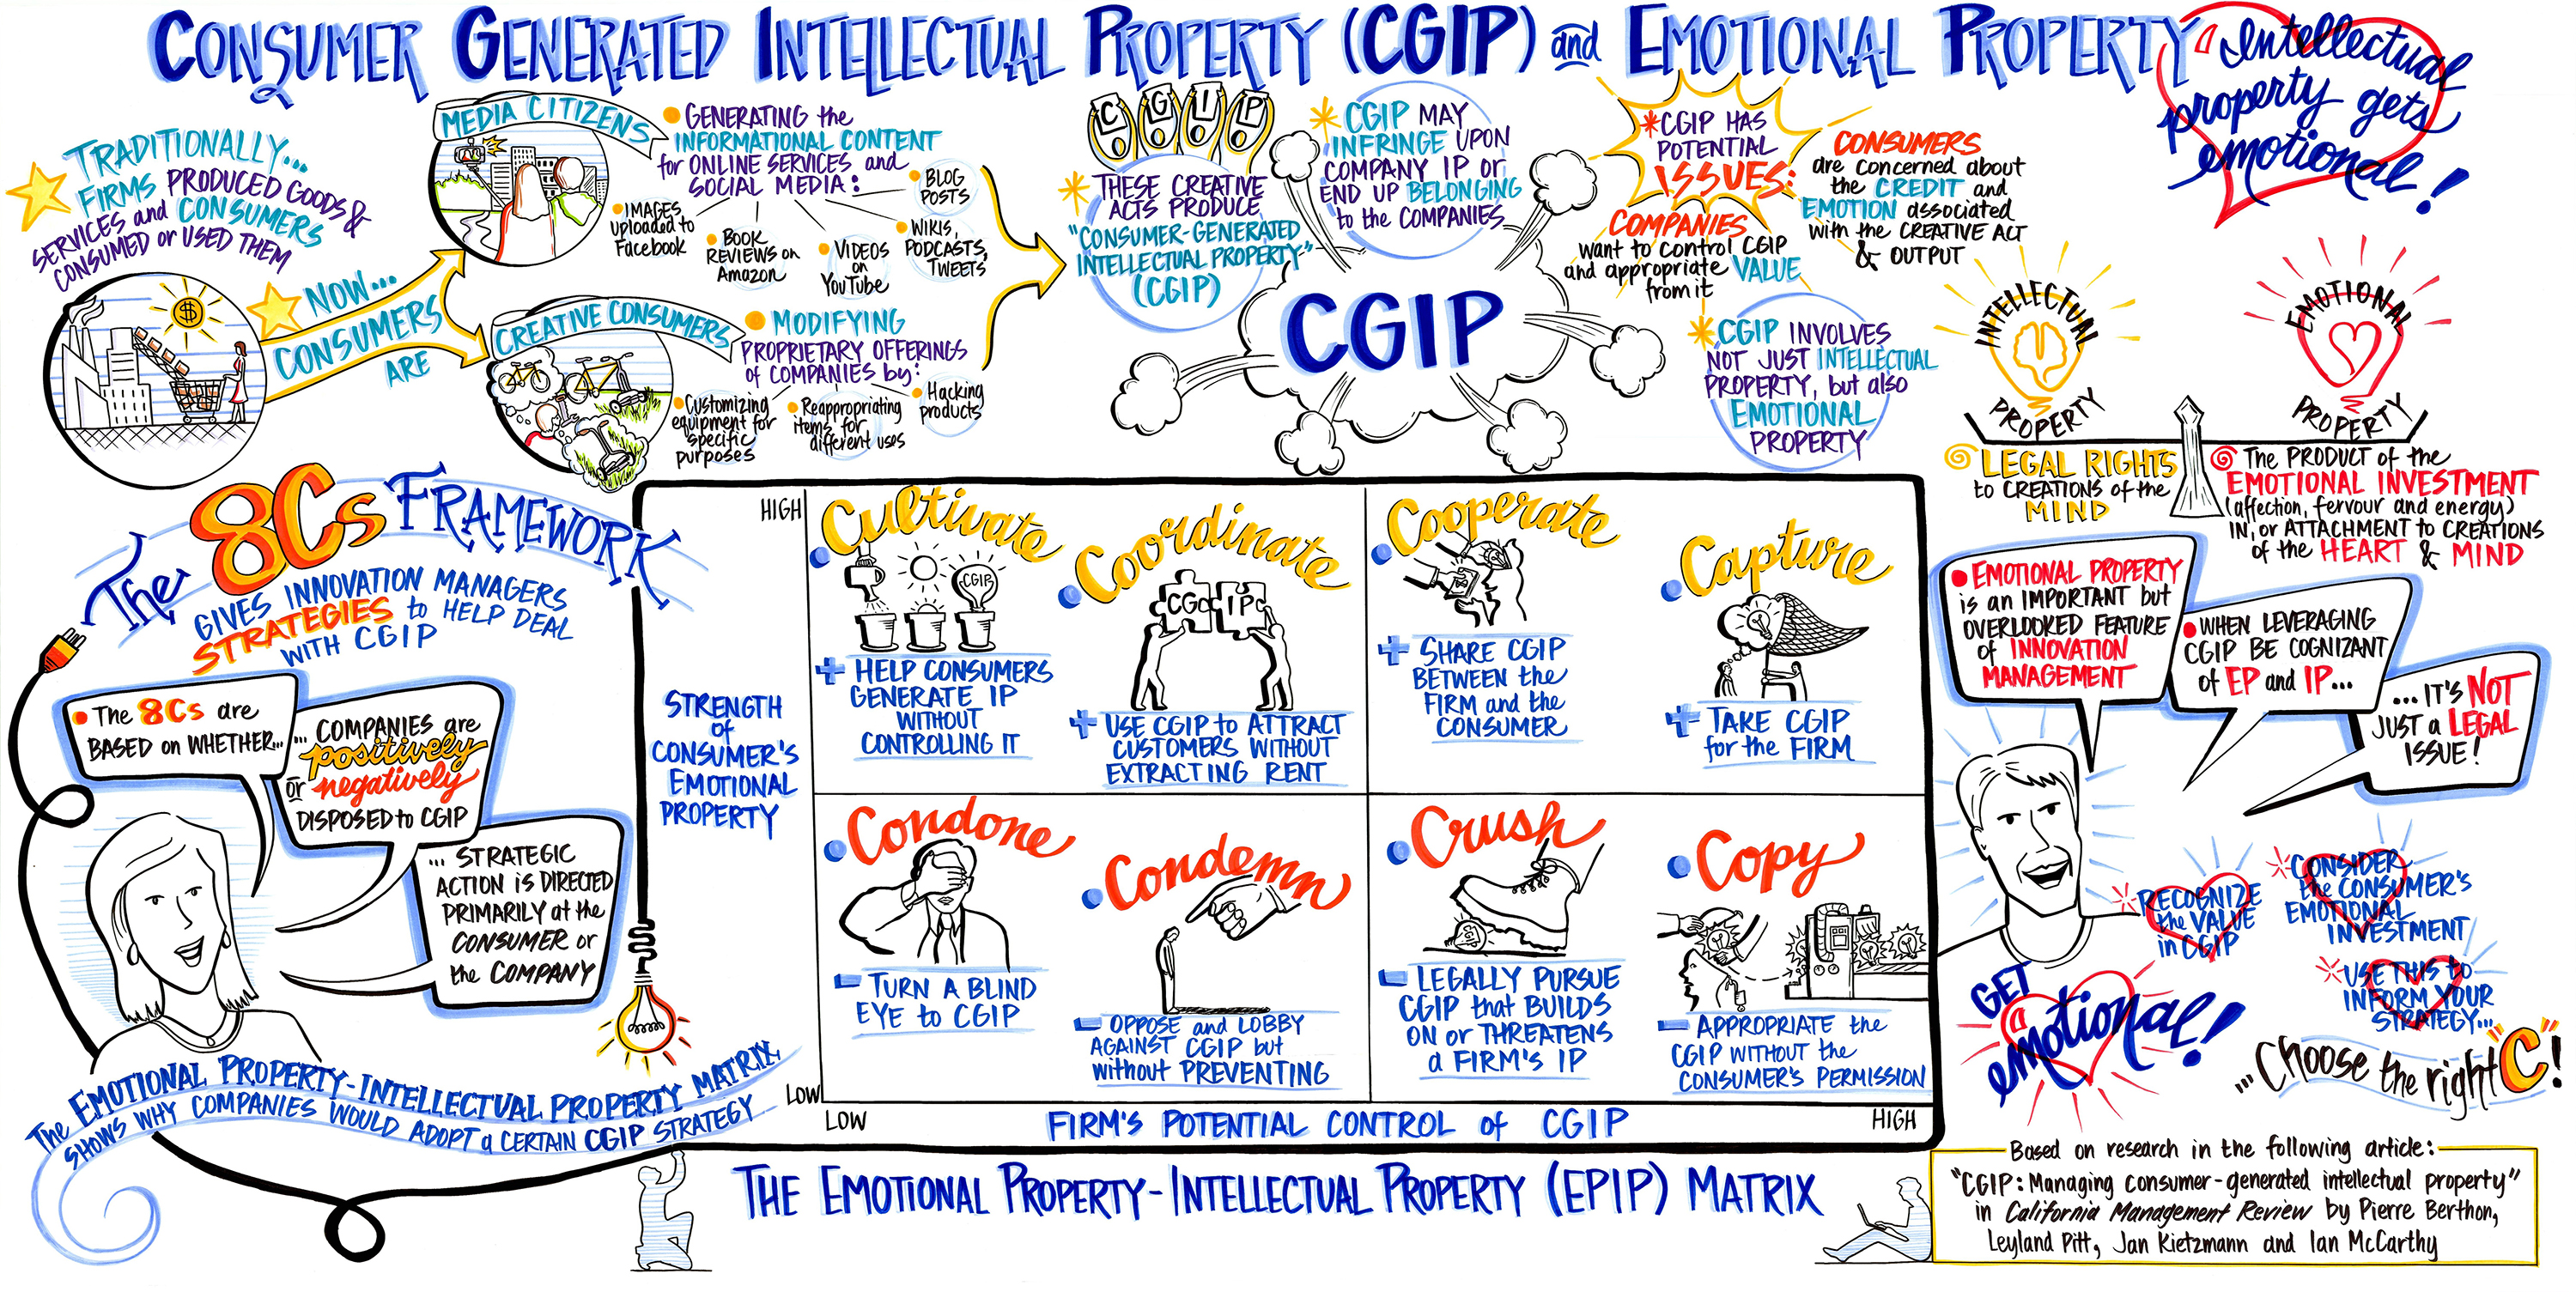 CGIP: Managing consumer-generated intellectual property.